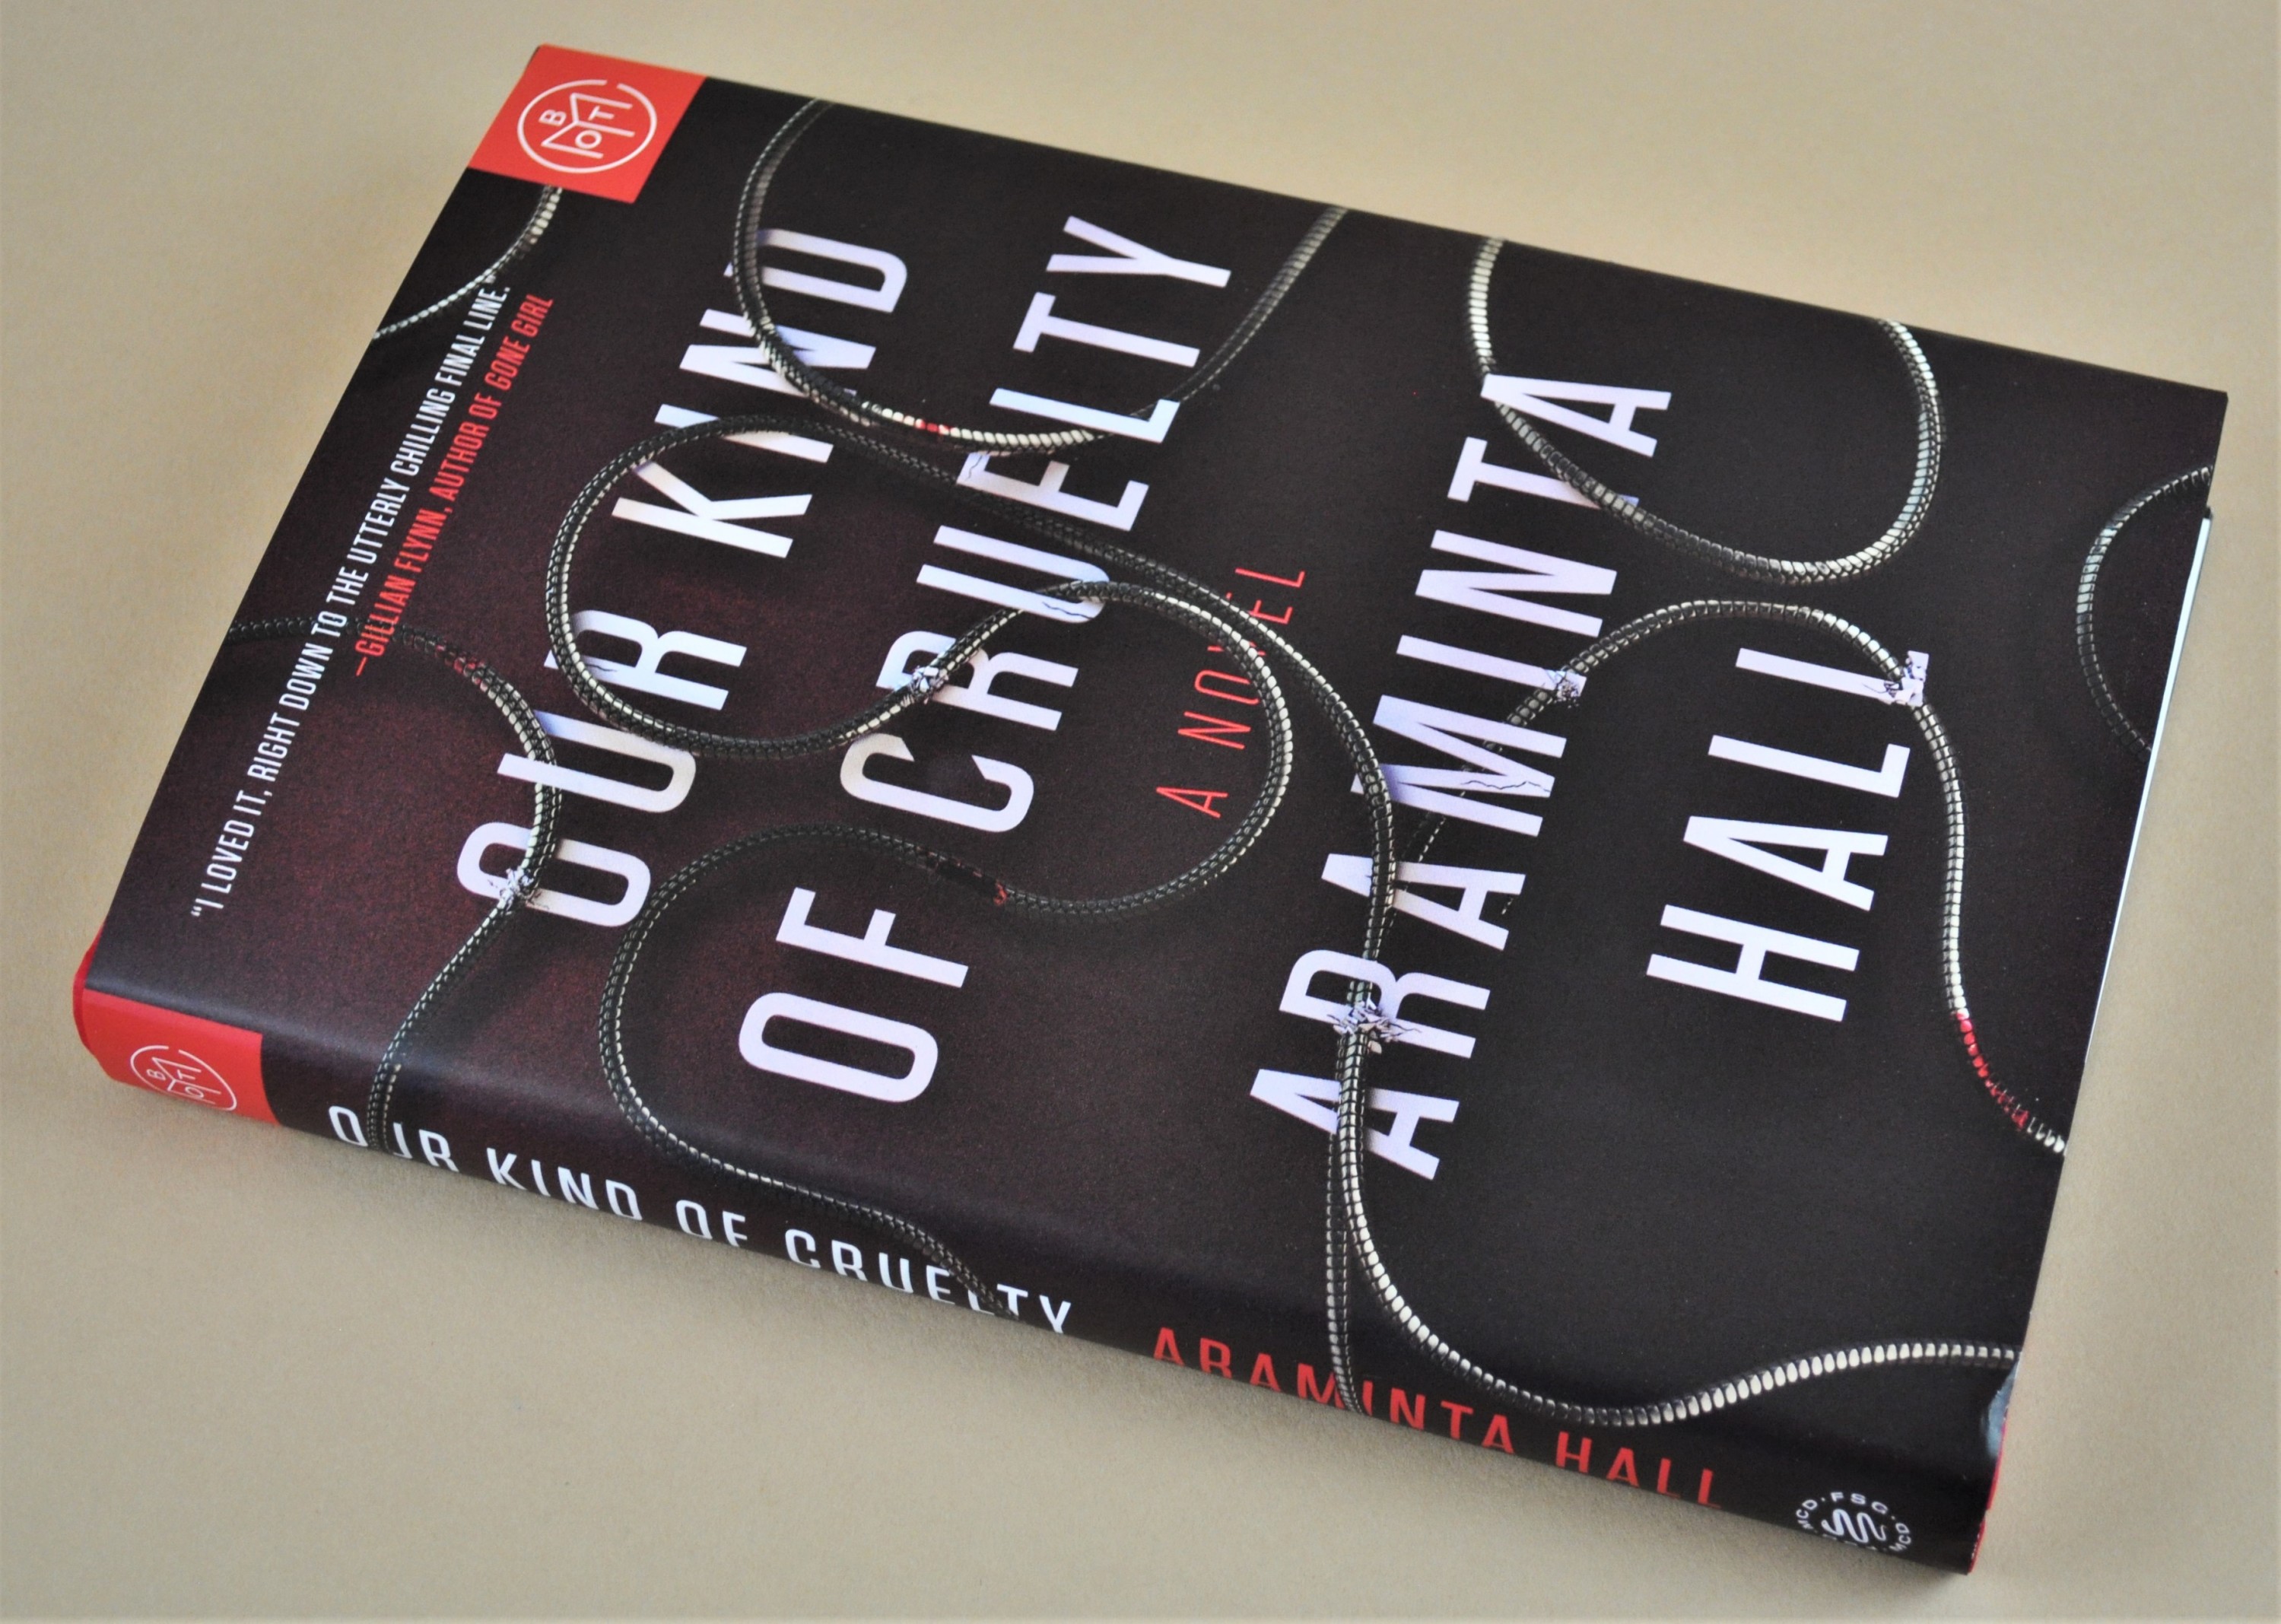 Our Kind of Cruelty; Araminta Hall; Book Reviews; BOTM; Book of the Month